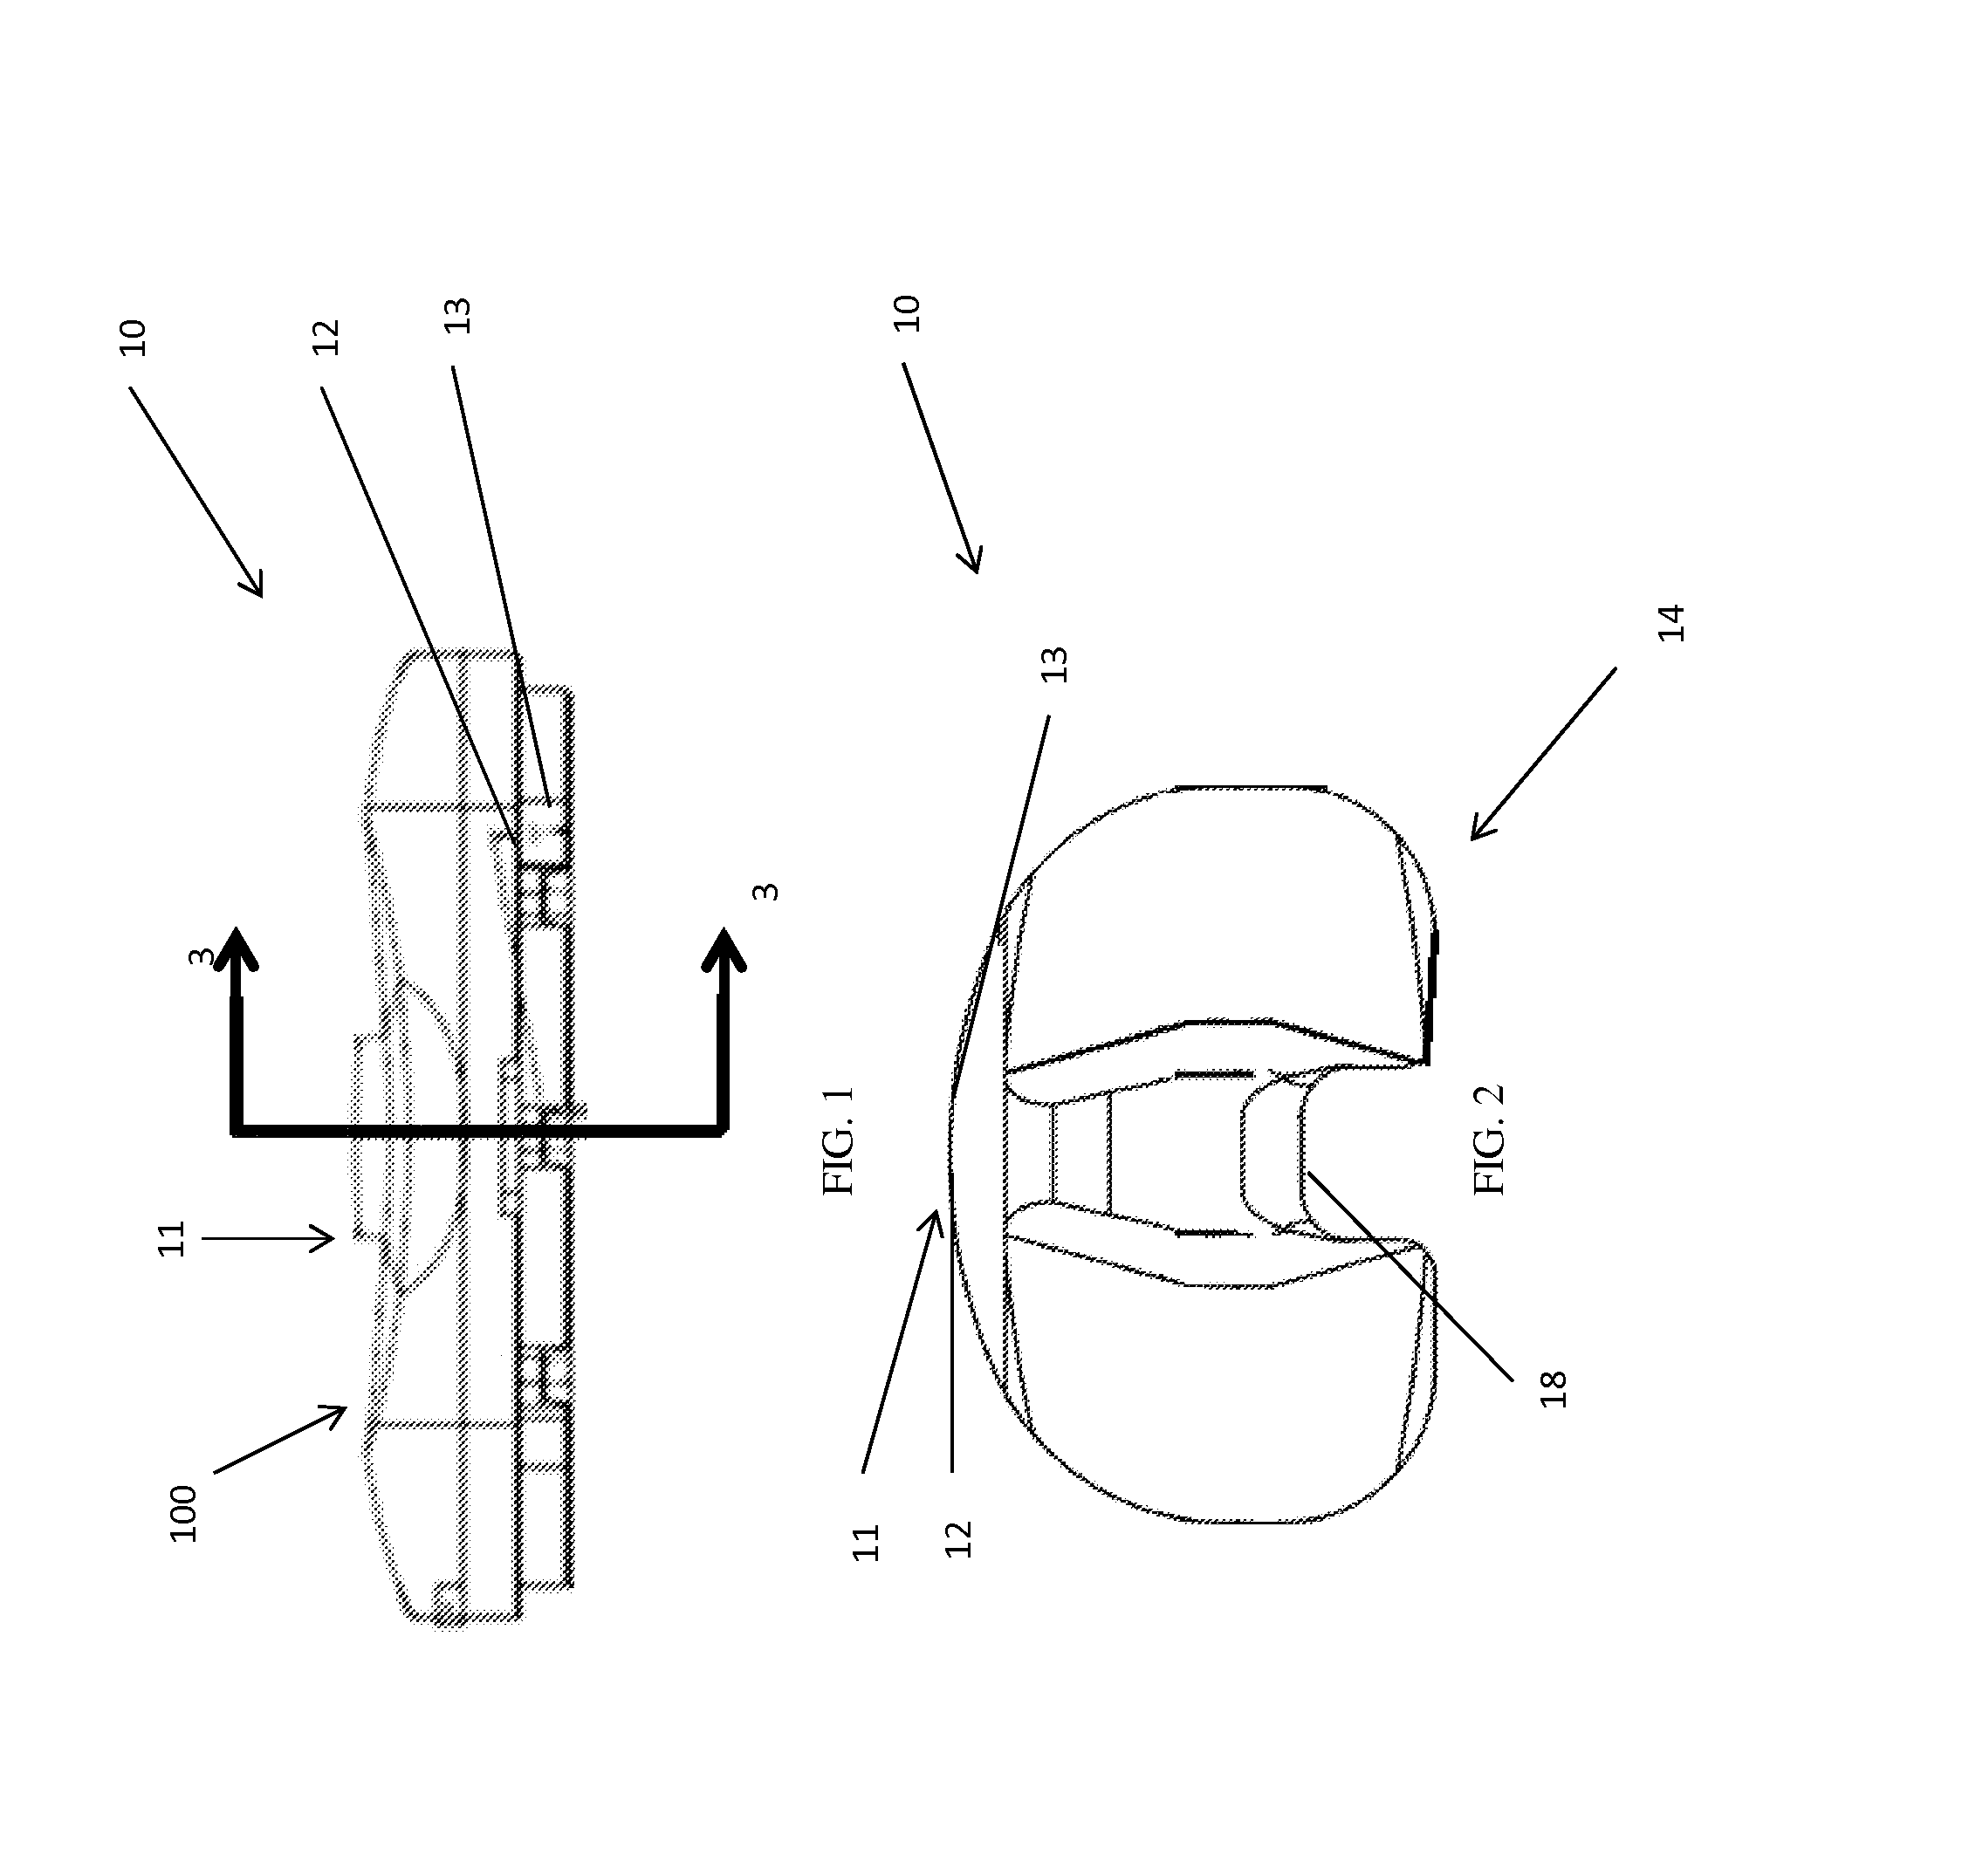 Implant system with pe insert and two tray options